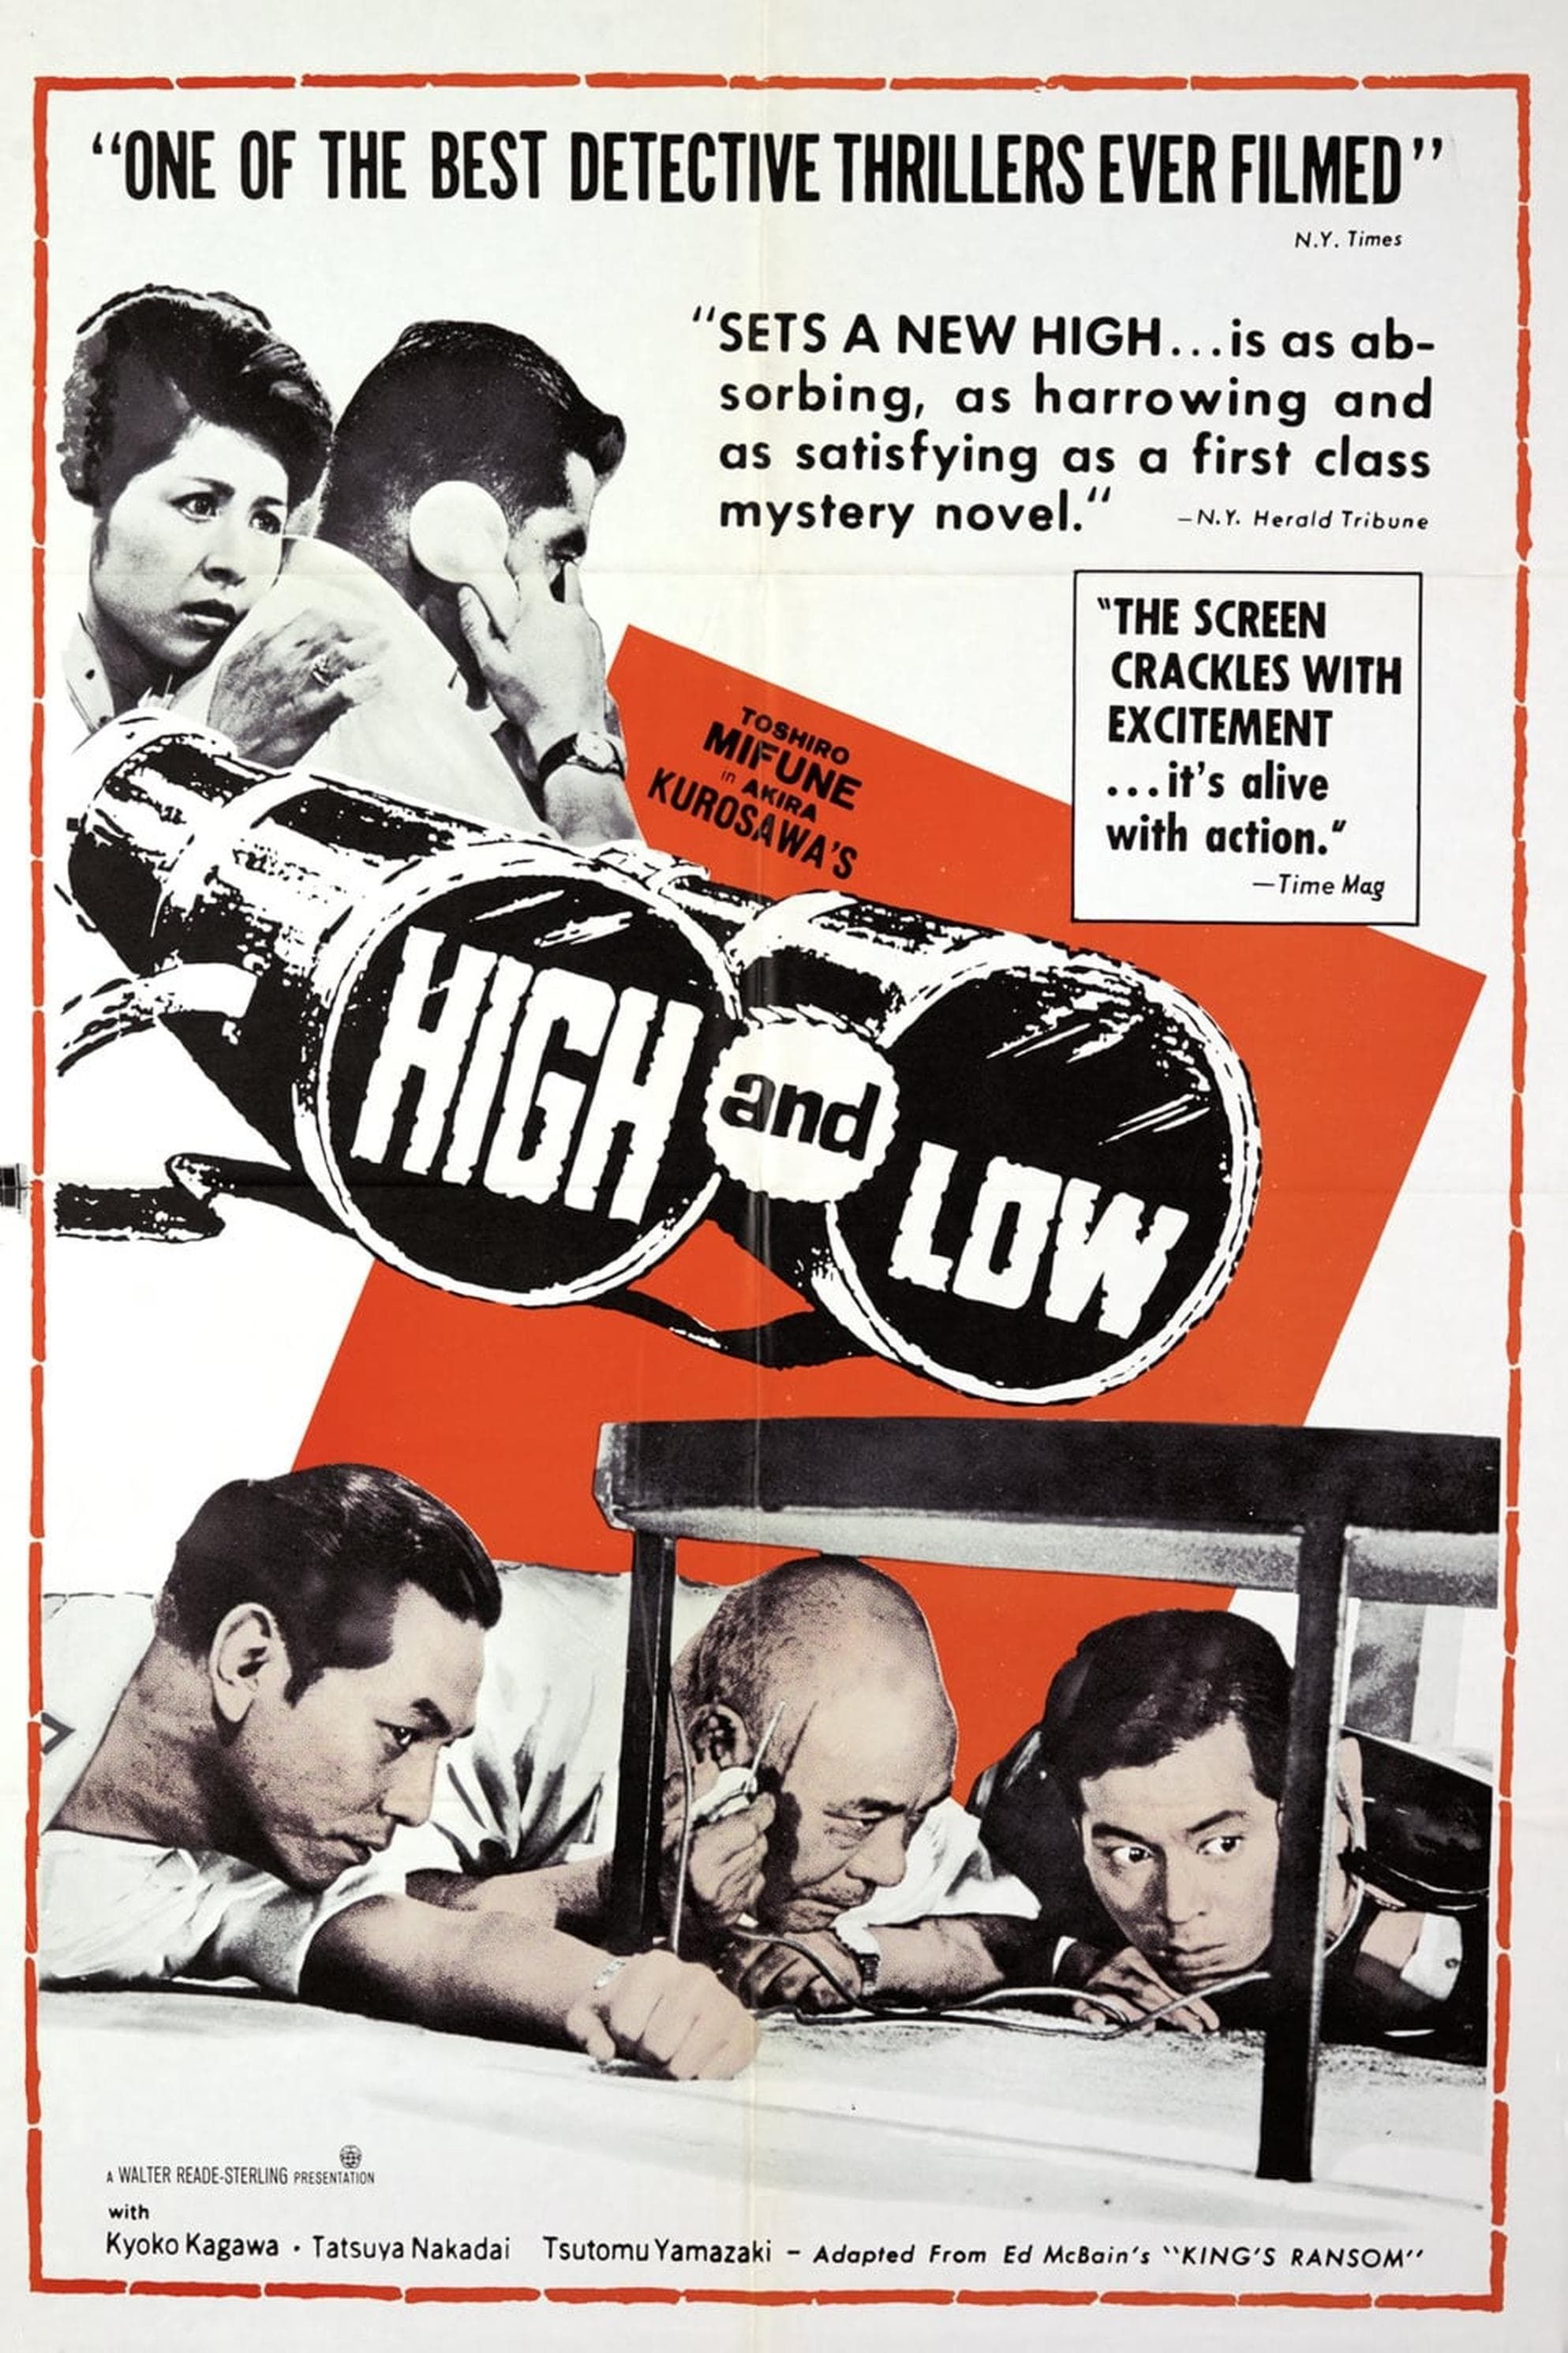 High and Low 1963 Movie Poster